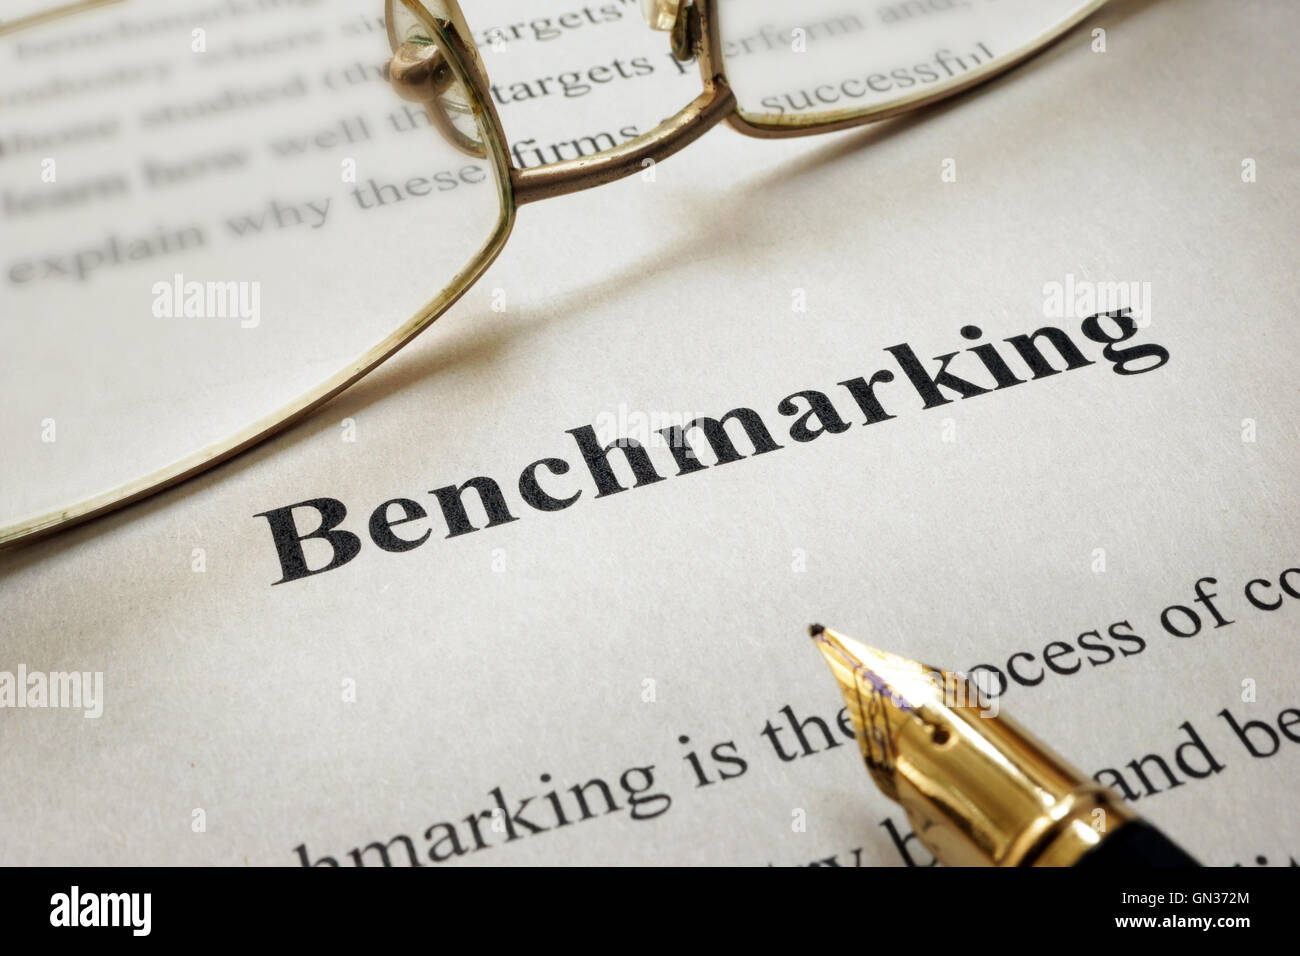 Page of paper with words Benchmarking and glasses. Stock Photo